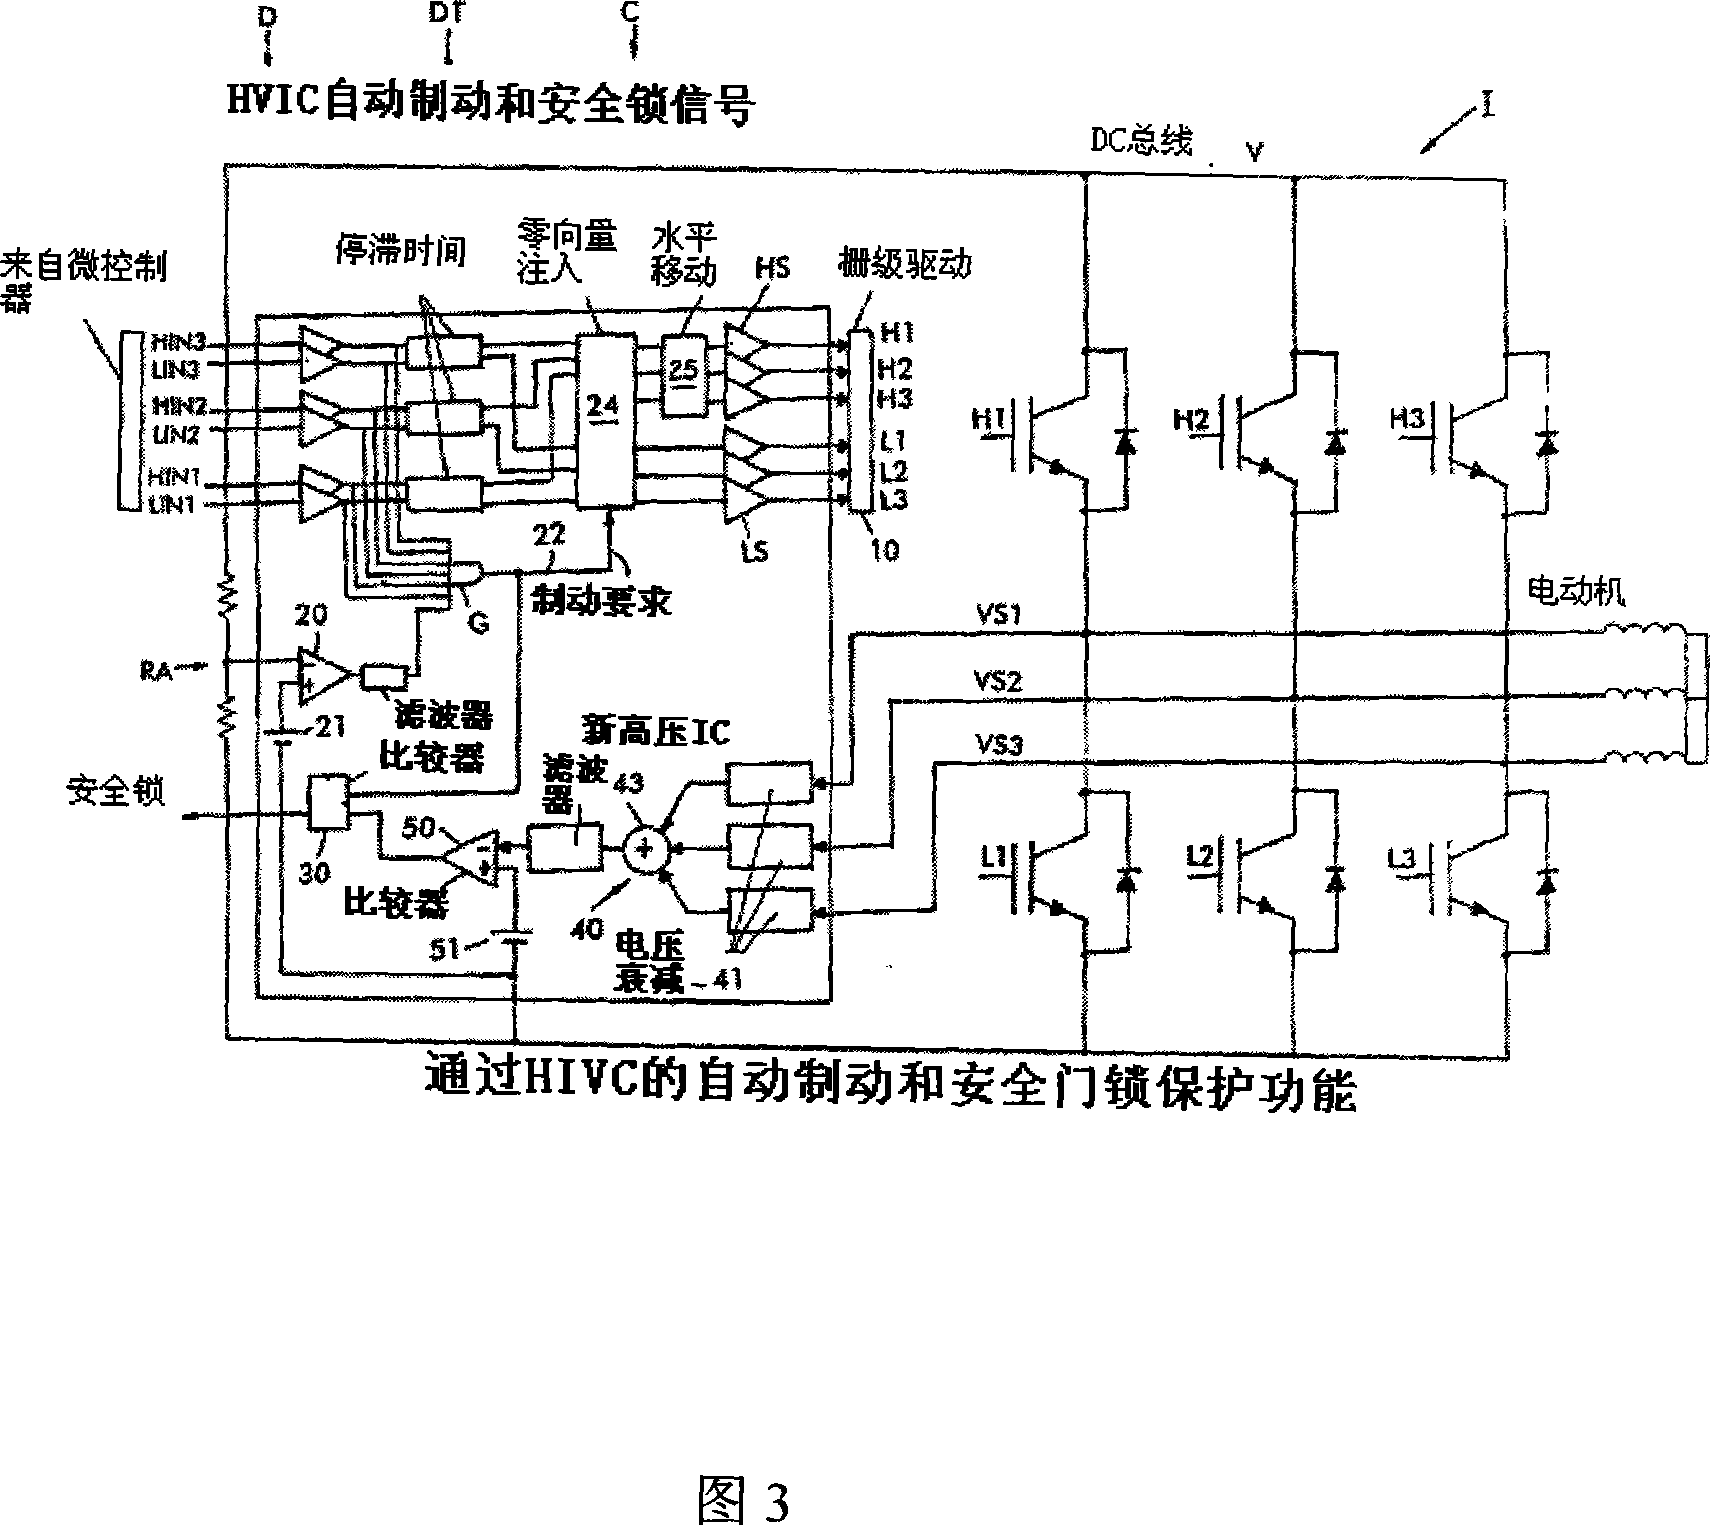 Safety interlock and protection circuit for permanent magnet motor drive